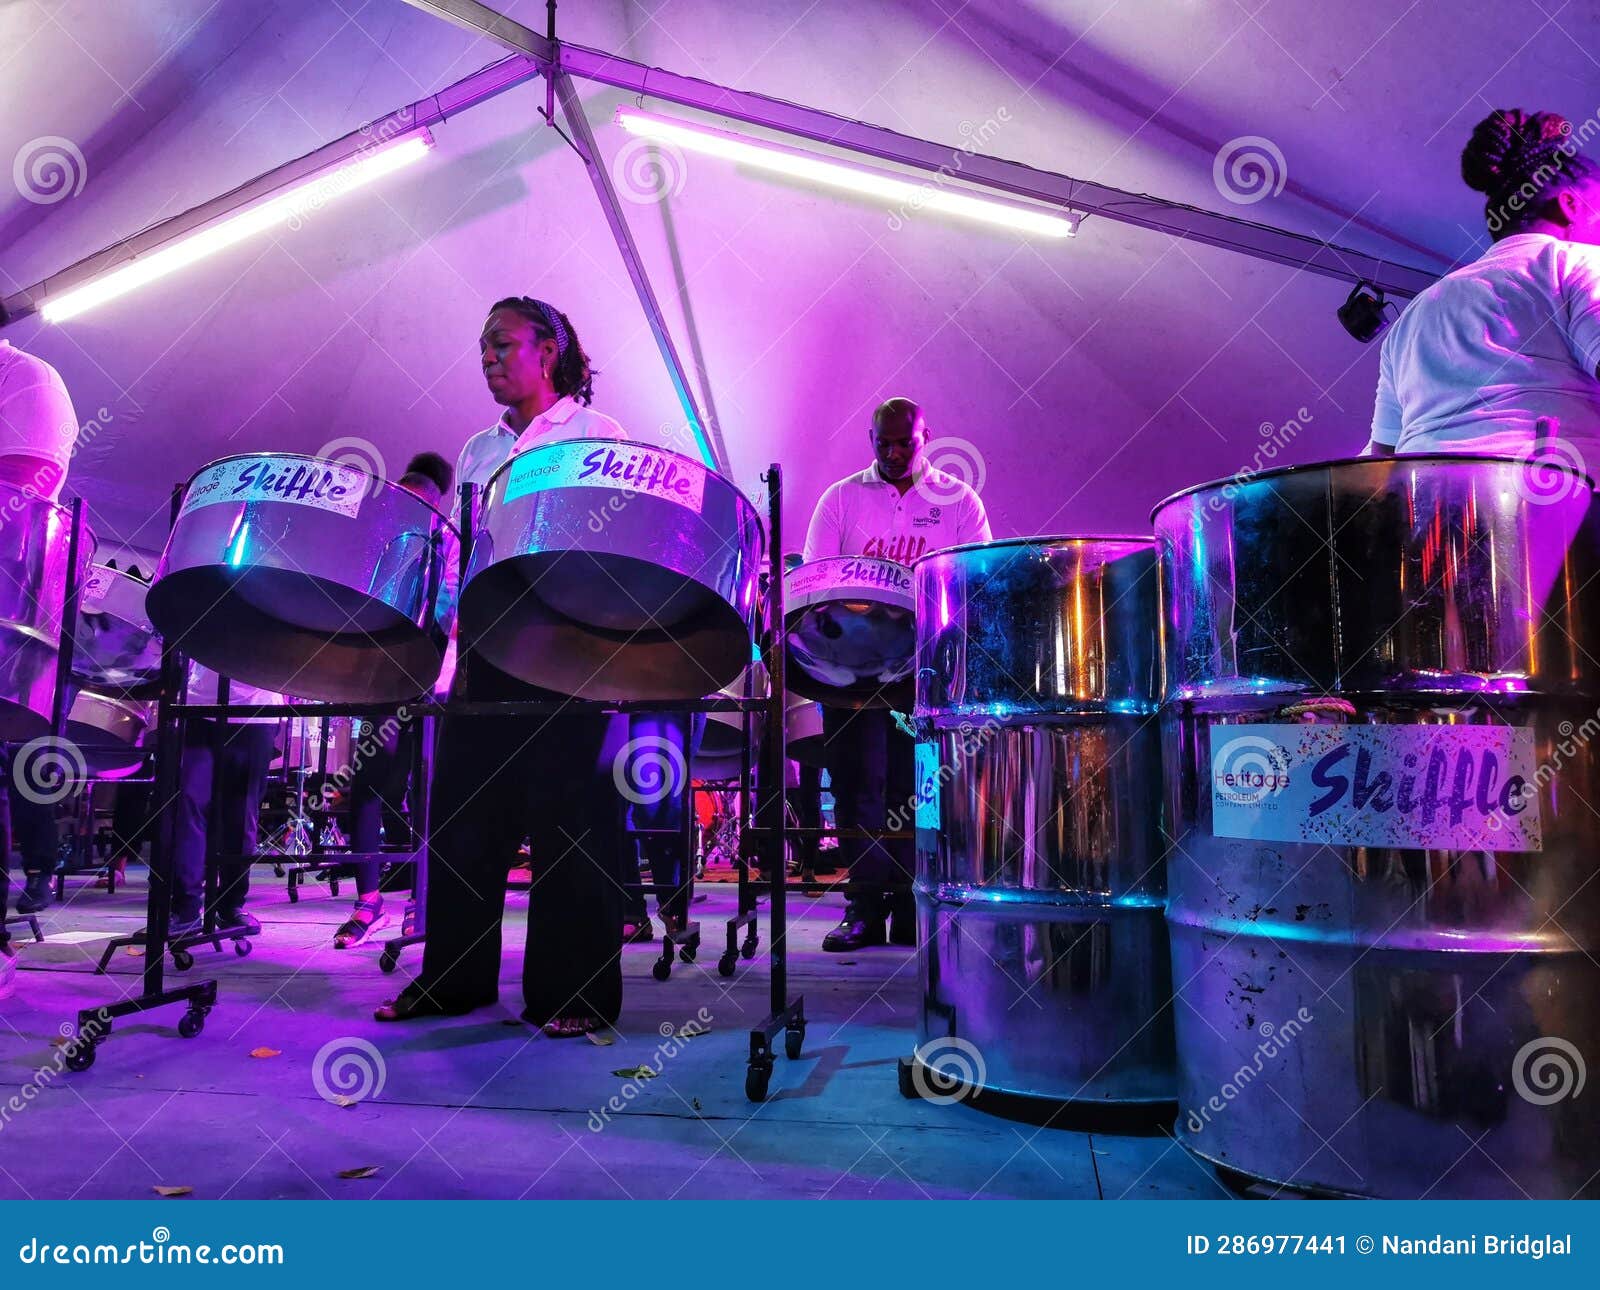 World Steelpan Day Celebration in Port of Spain, Trinidad and Tobago ...